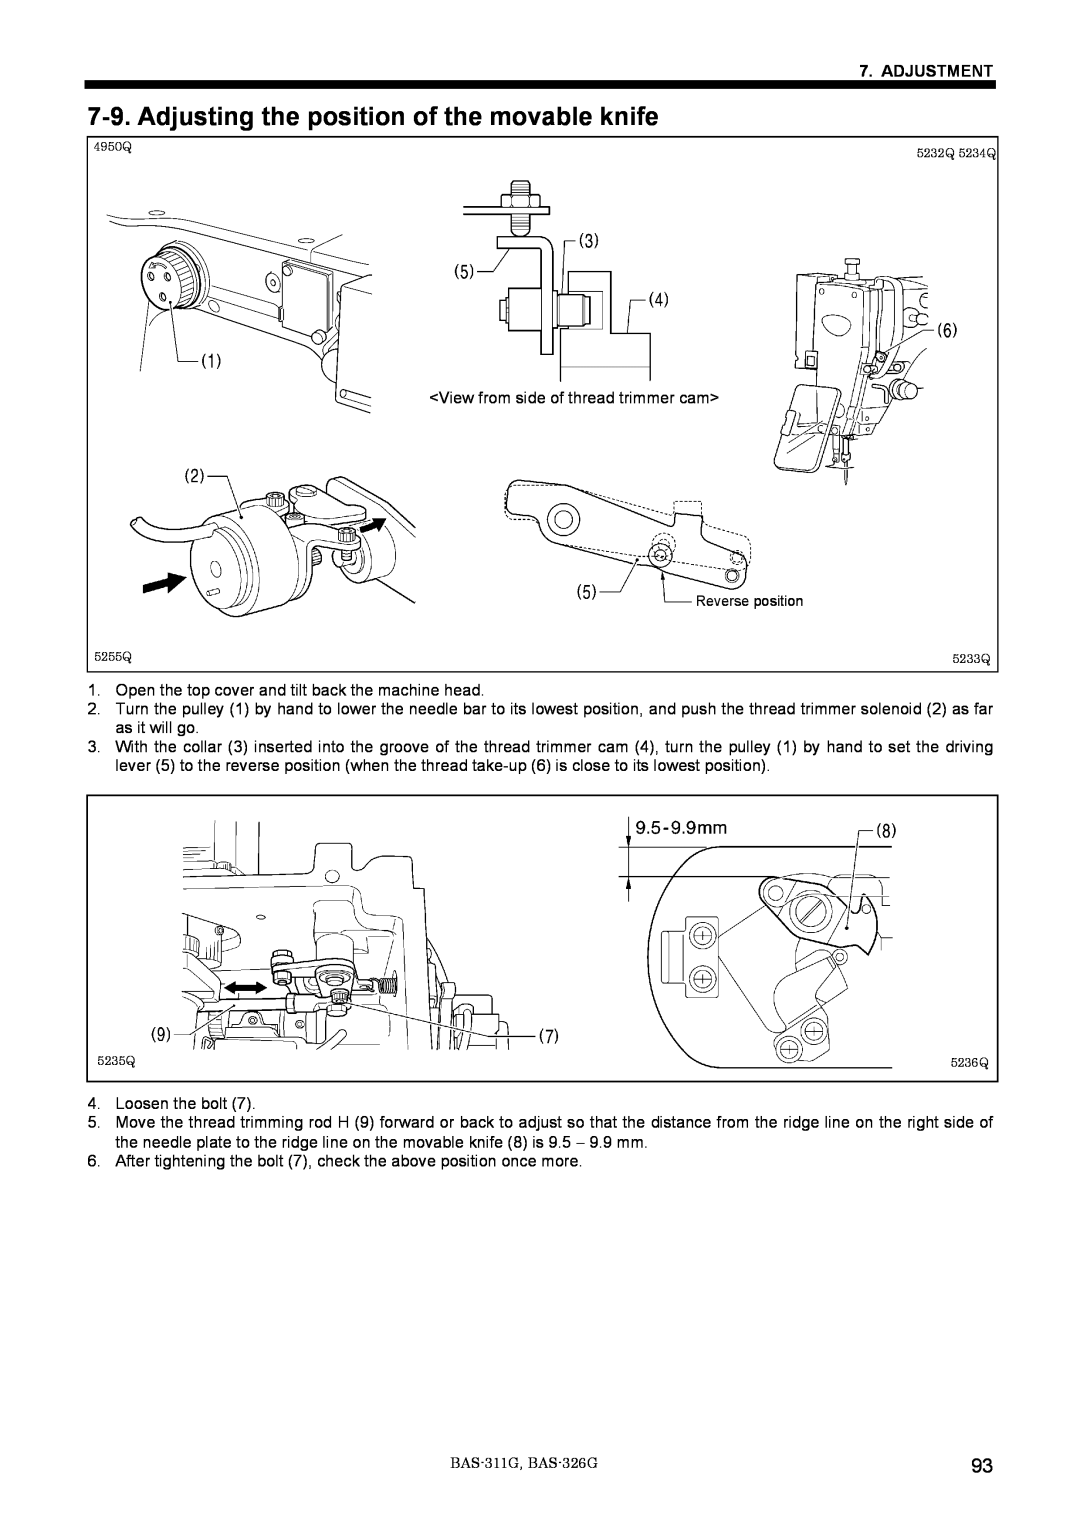 Brother BAS-311G service manual Adjusting the position of the movable knife, Adjustment 